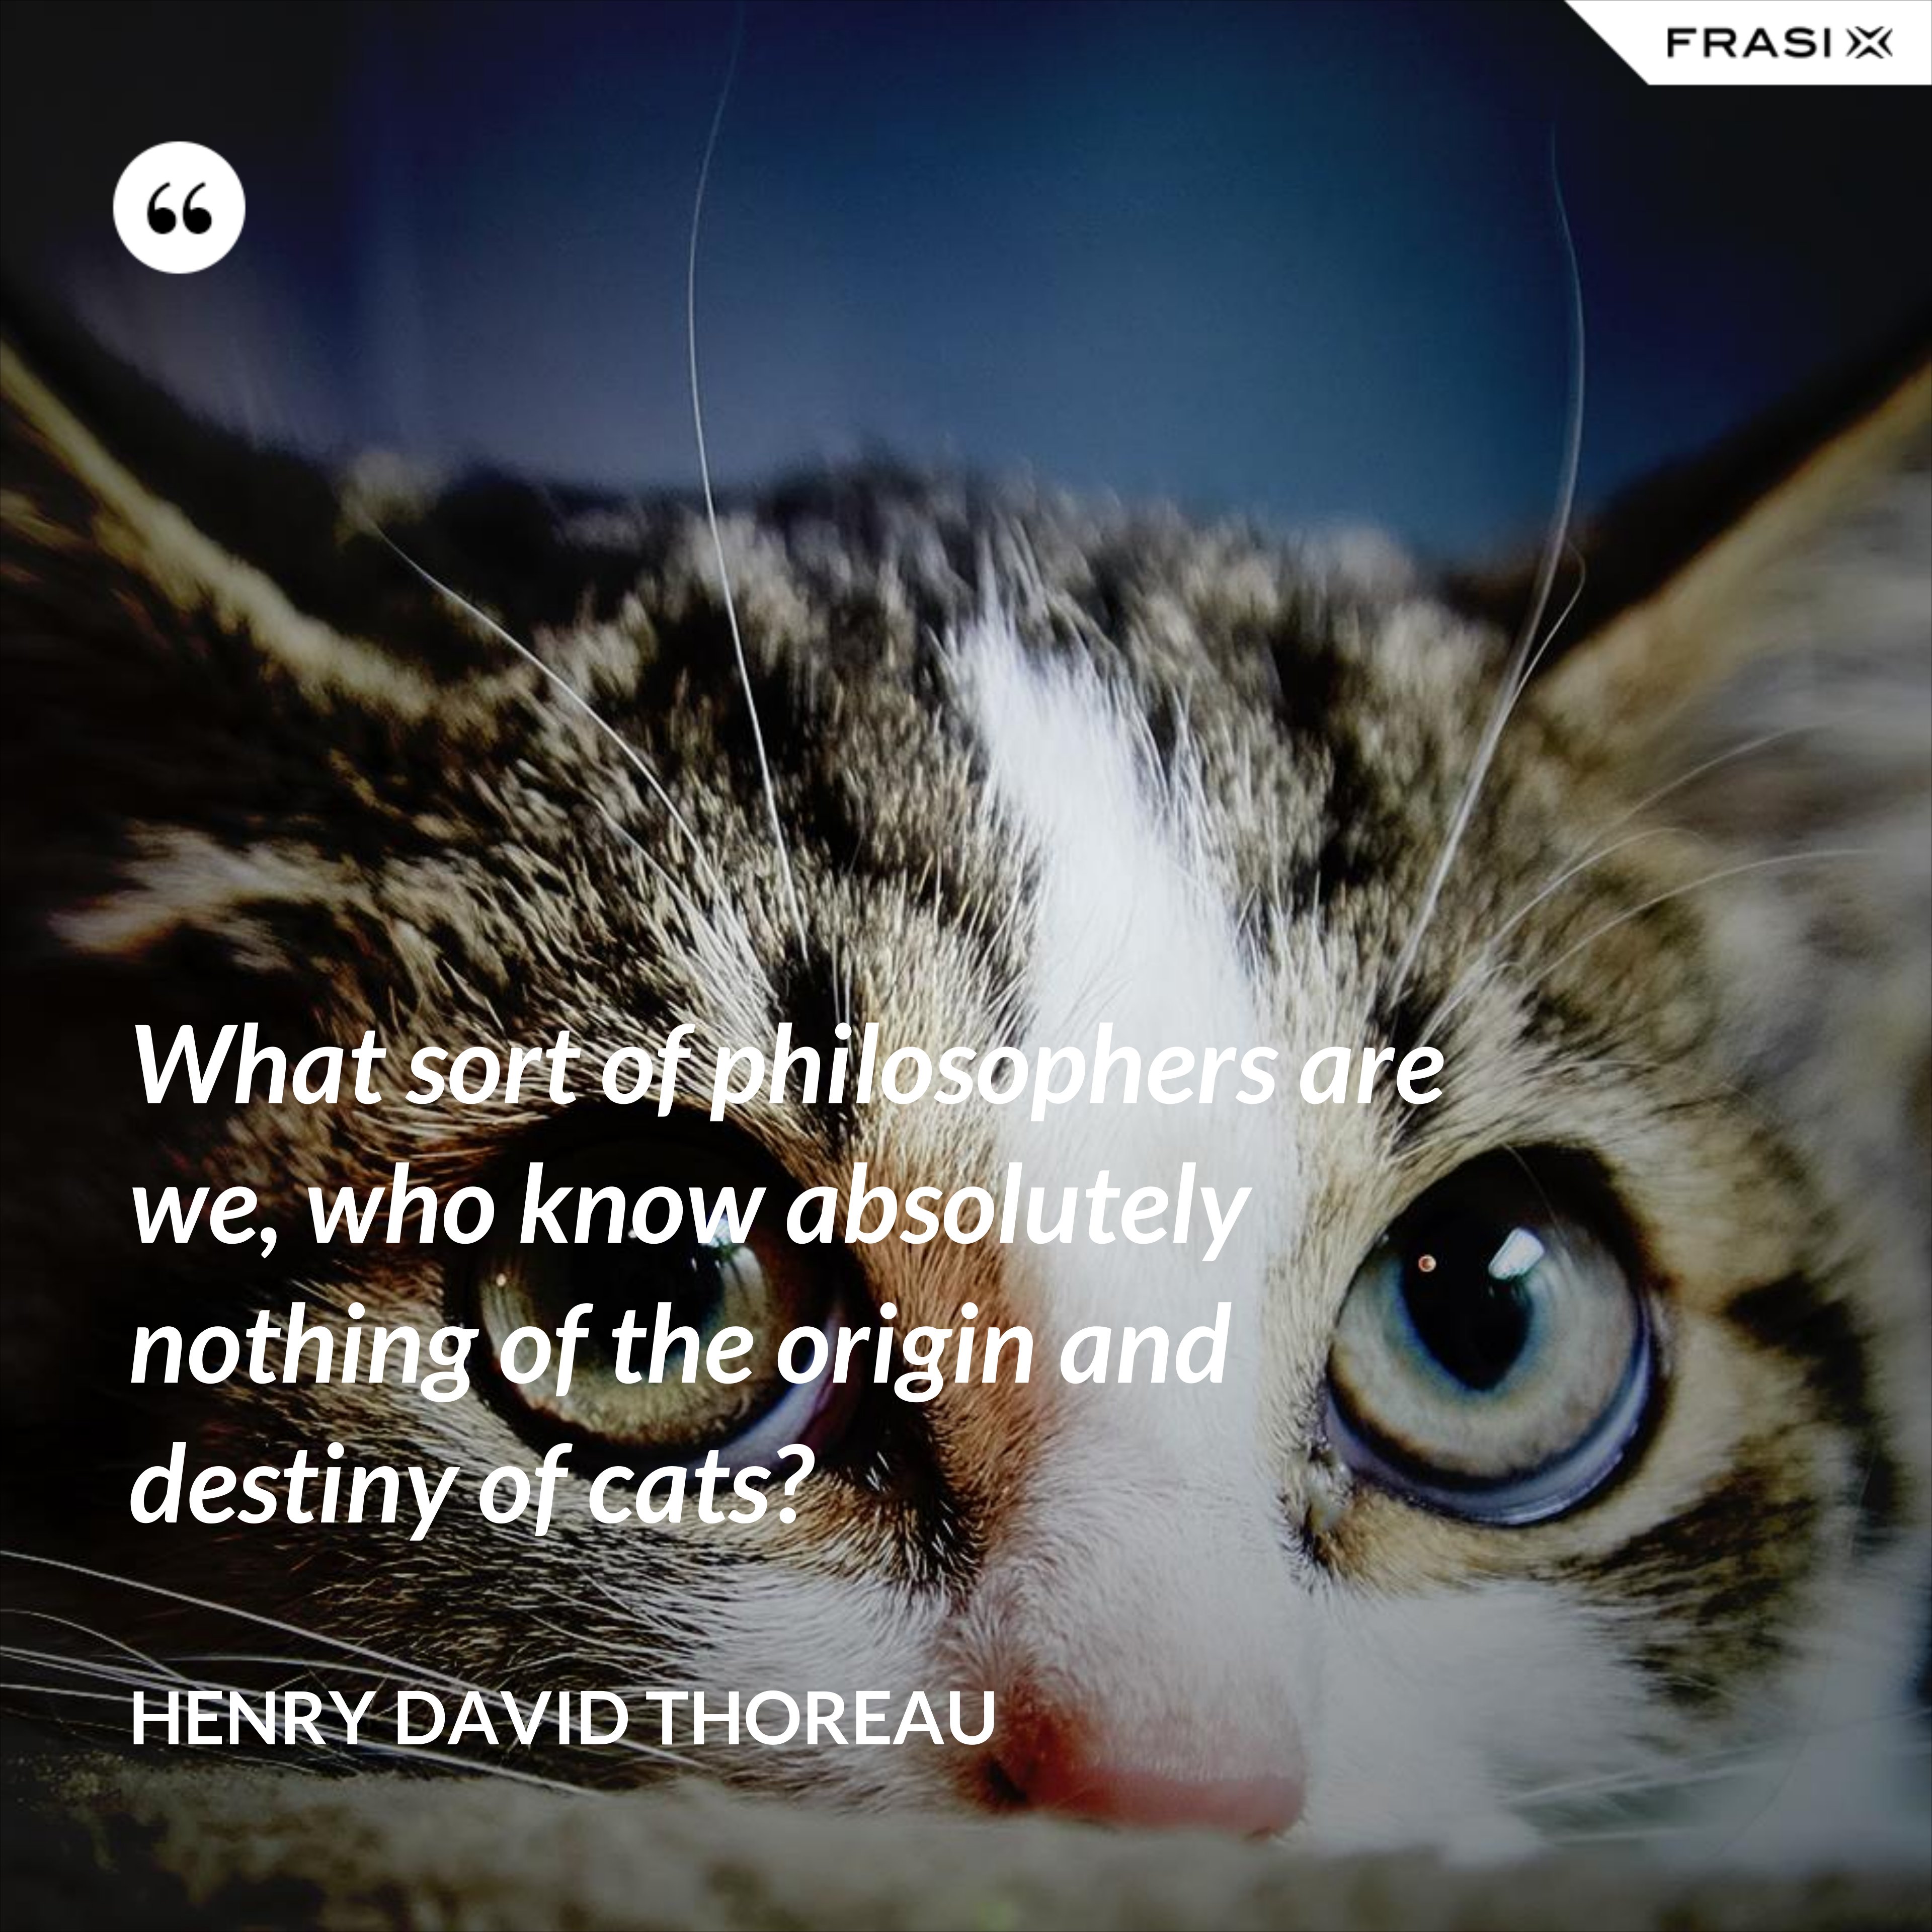 What sort of philosophers are we, who know absolutely nothing of the origin and destiny of cats? - Henry David Thoreau